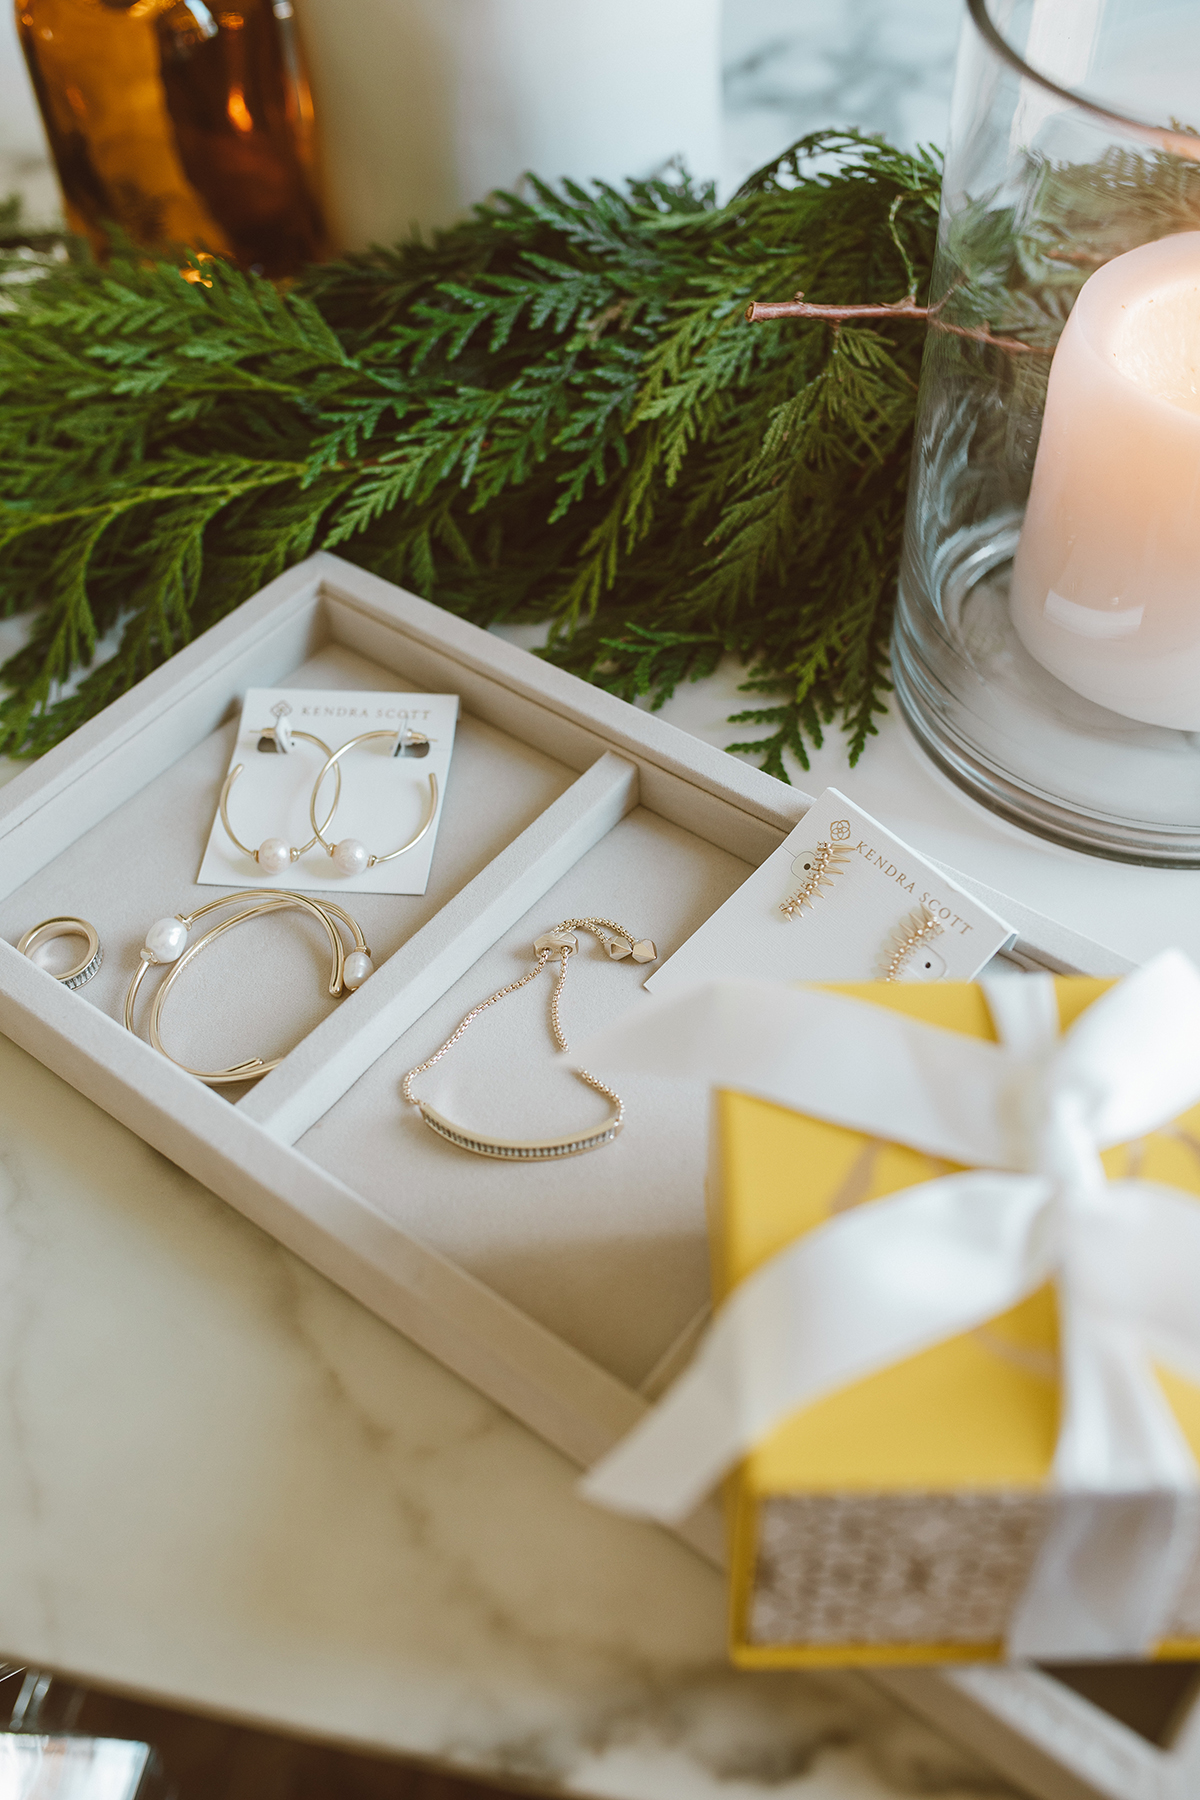 2019 Christmas gifts for her by Kendra Scott